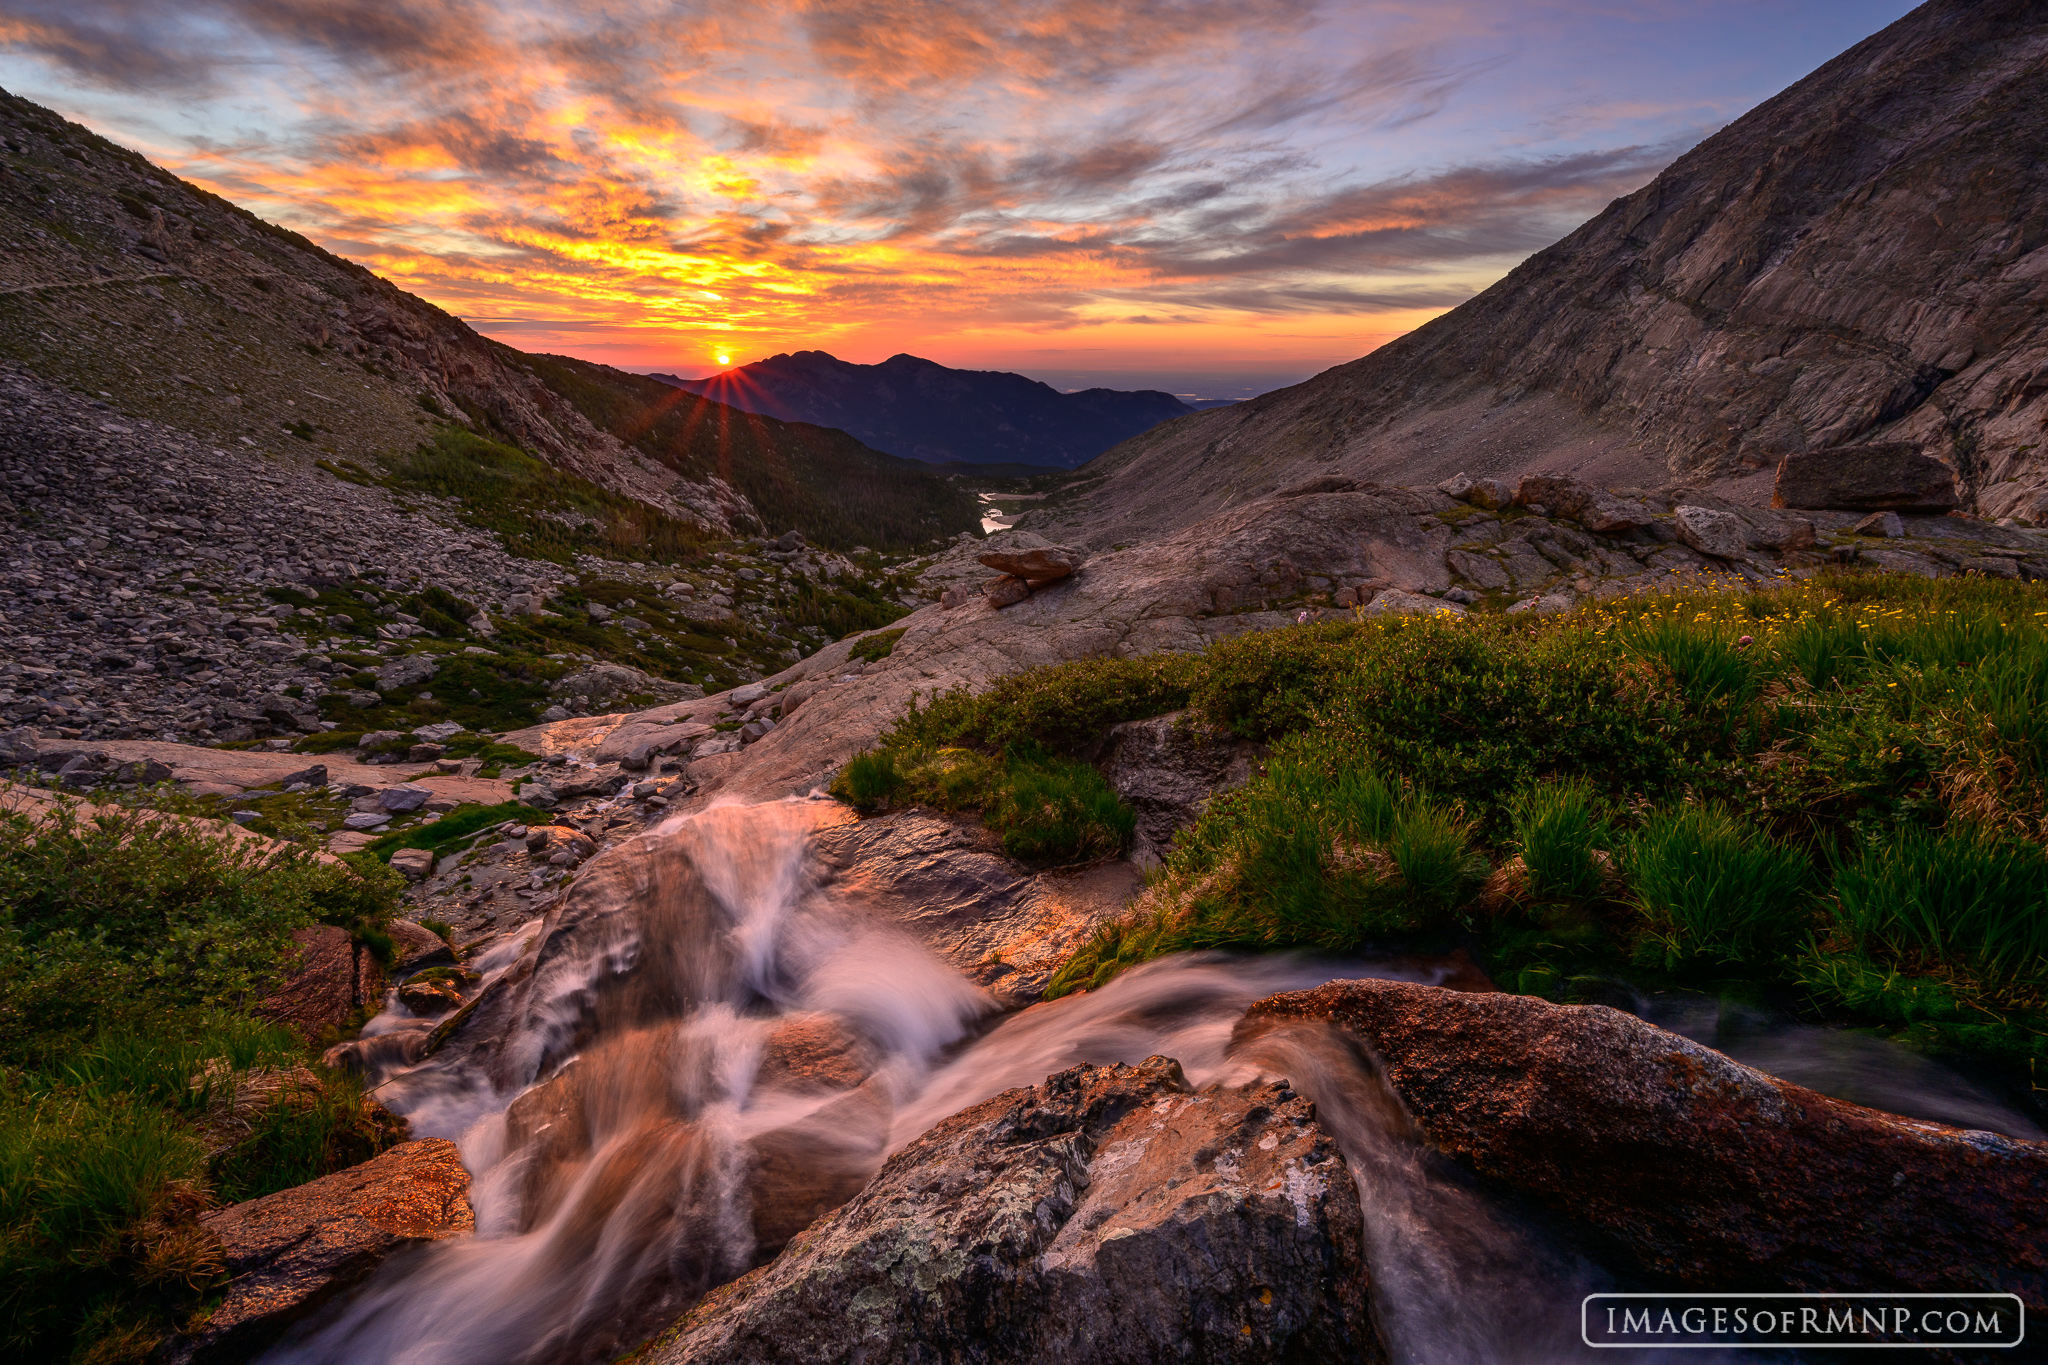 On a summer morning in Rocky Mountain National Park, the warm light of the rising sun gently awakens the world as the rushing...